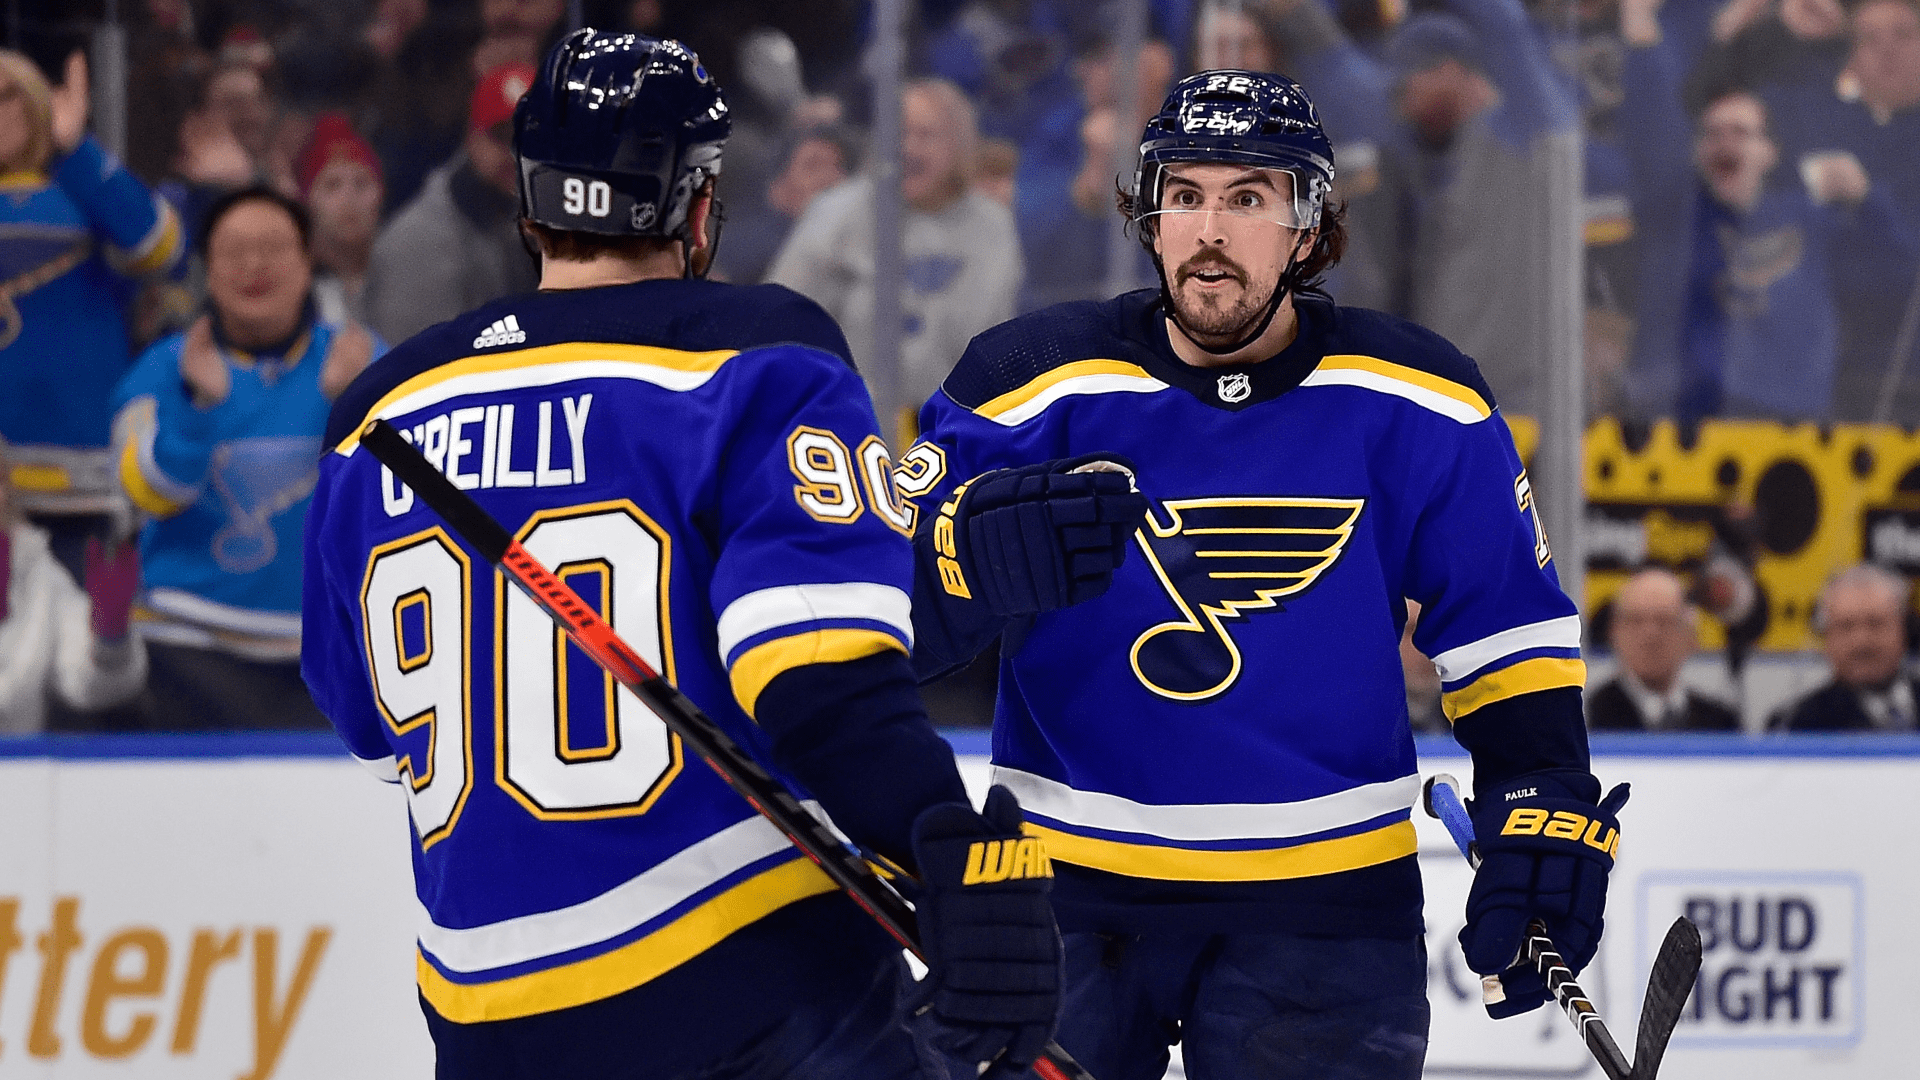 Blues' Pietrangelo: Testing free agency may be 'best for both